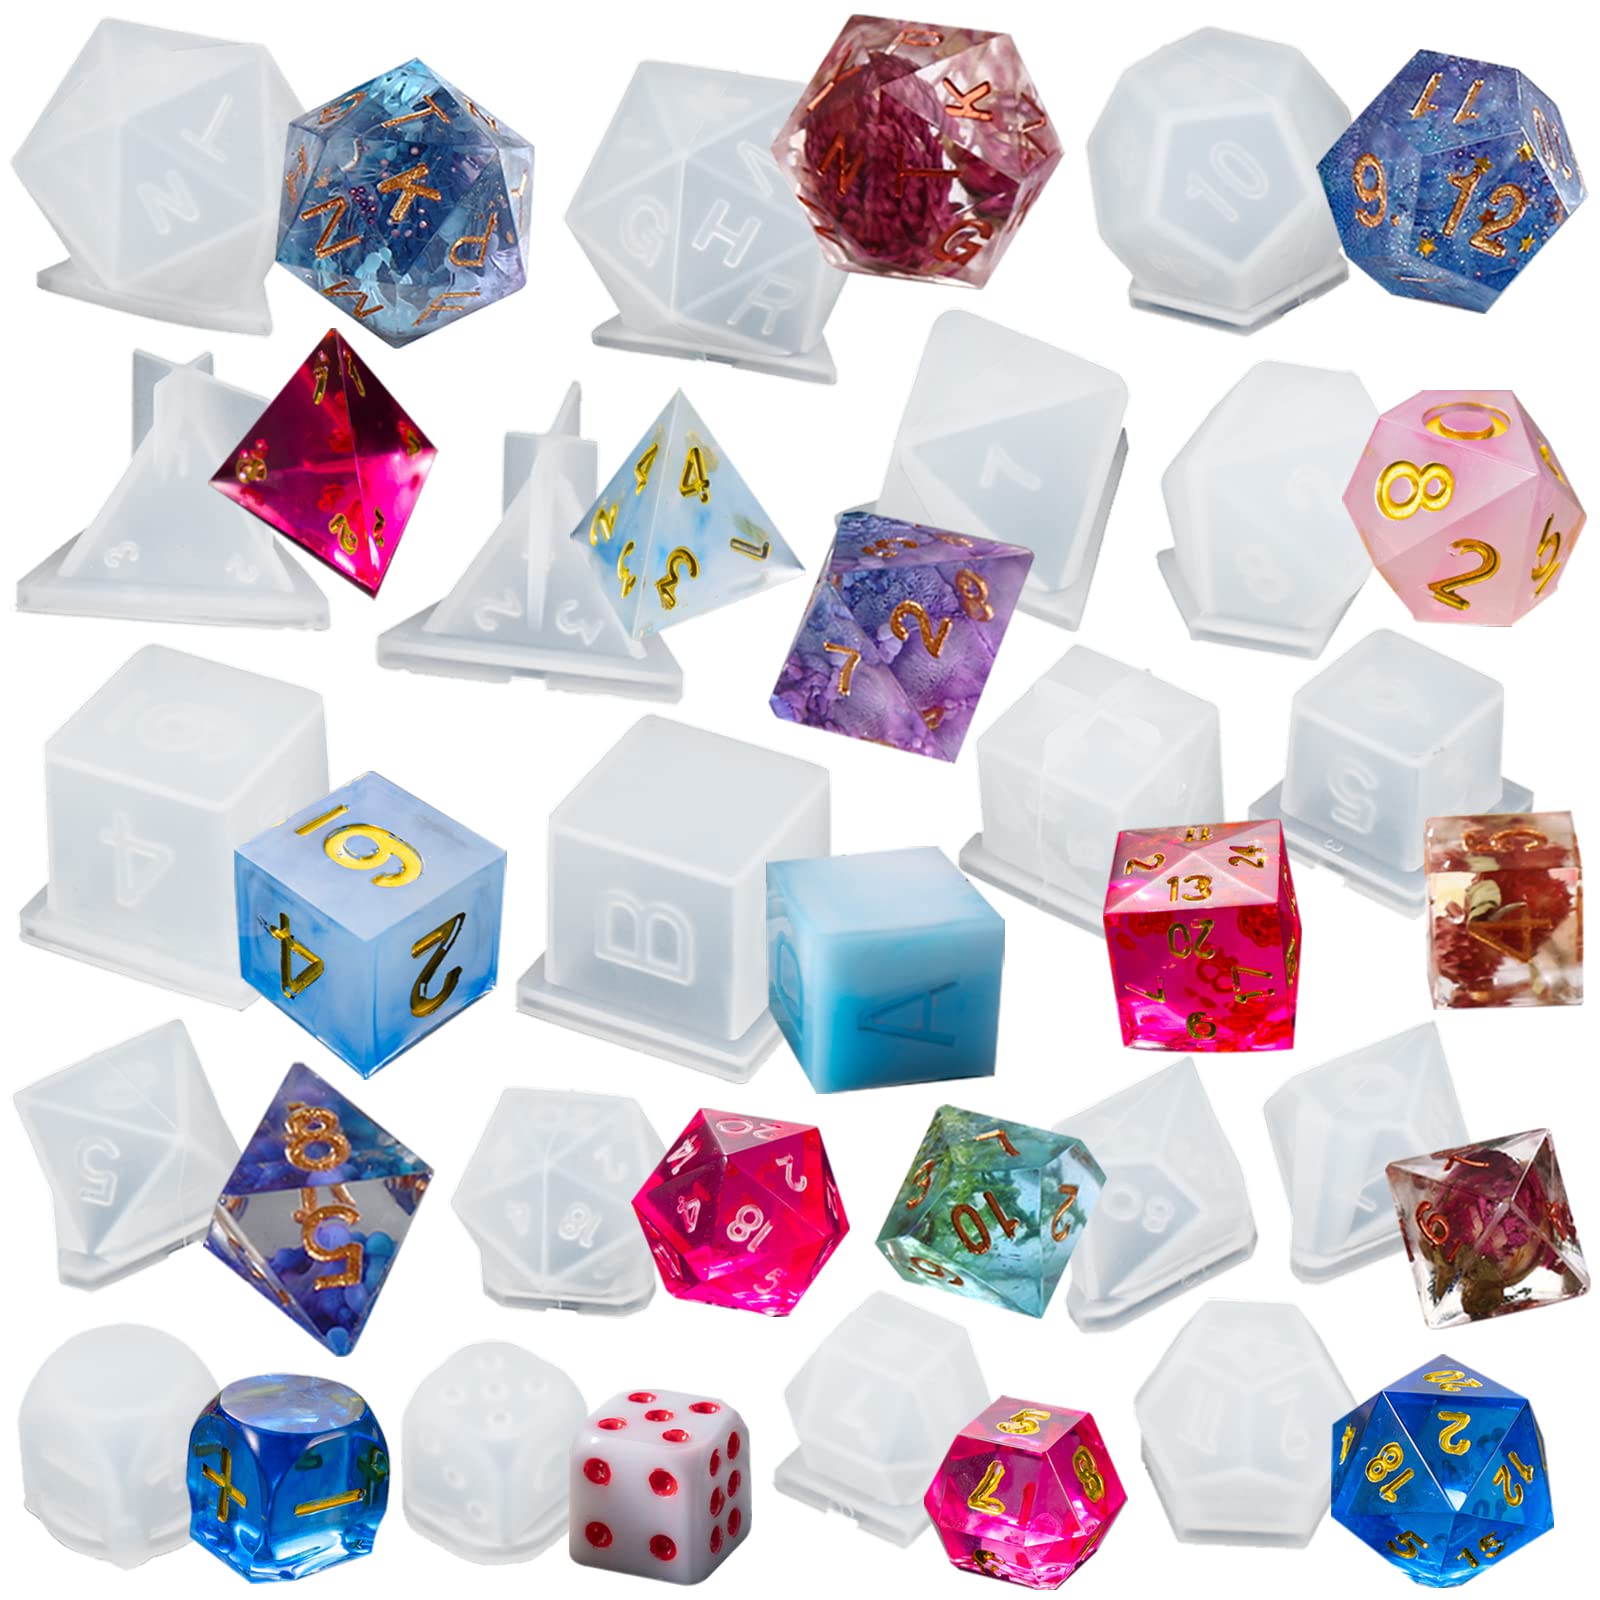 Dice Molds 10 Styles Polyhedral Game Dice Molds Set Silicone Dice